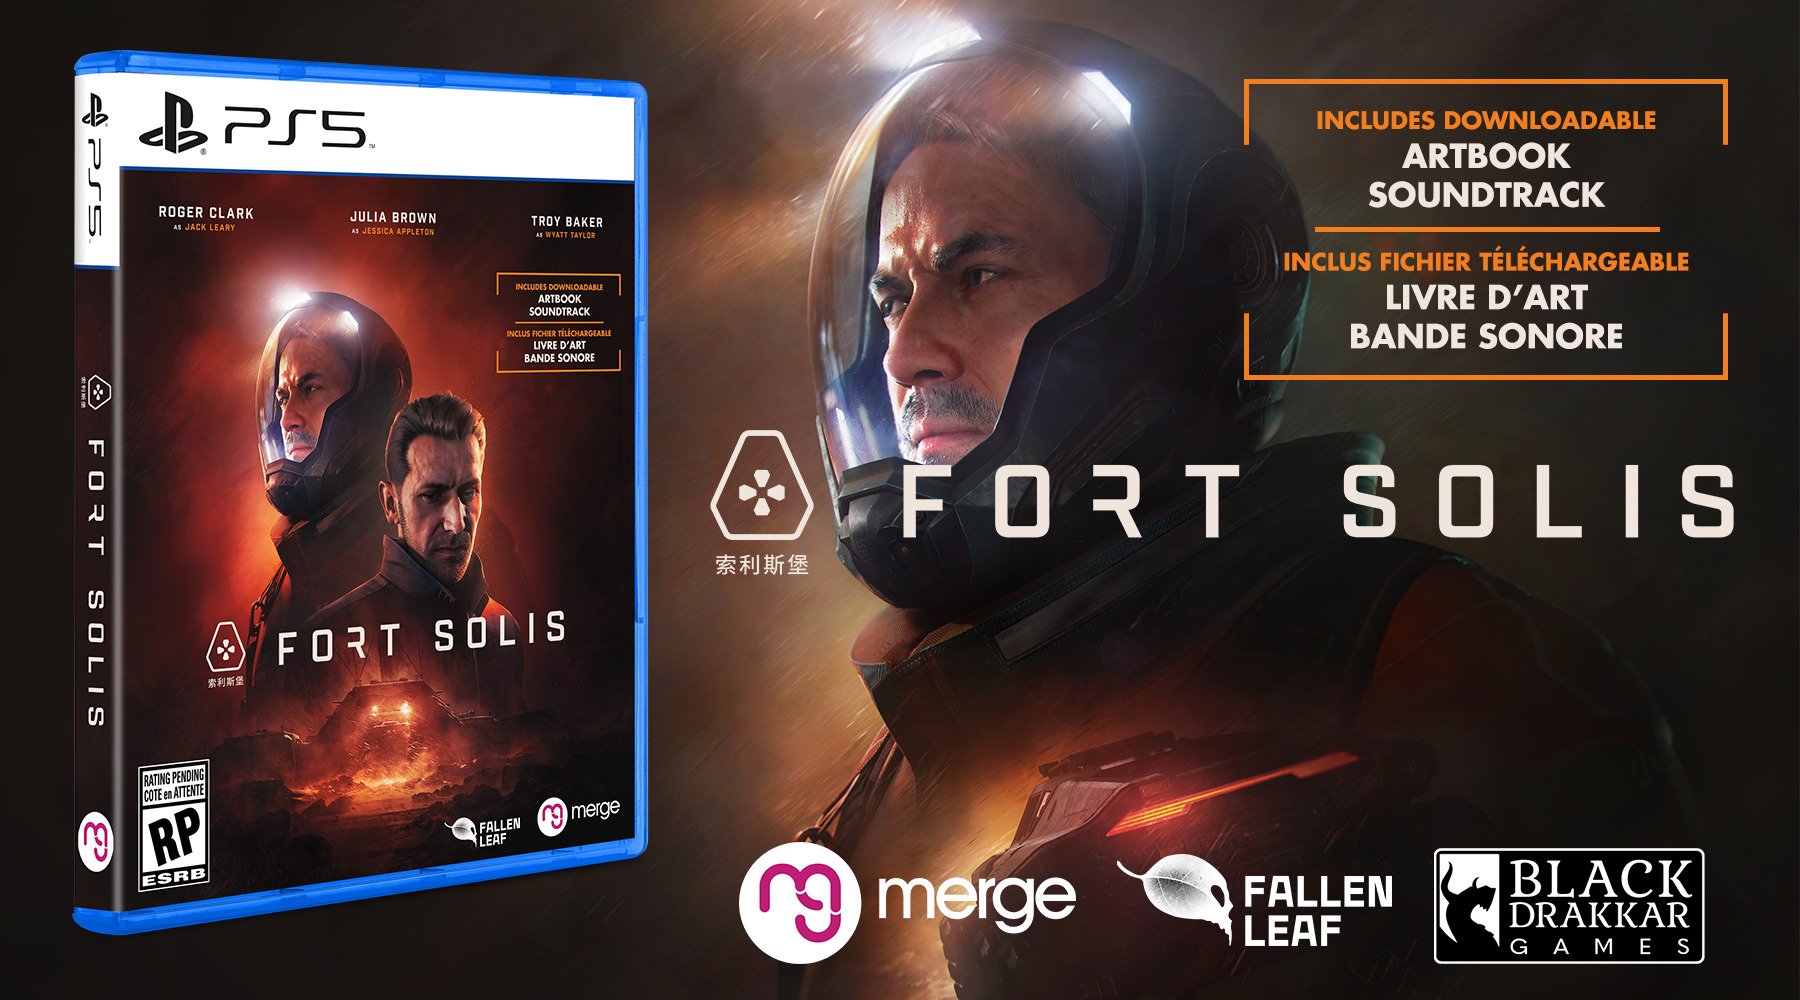 New Narrative Sci-Fi Game Fort Solis Launches on PS5 and PC